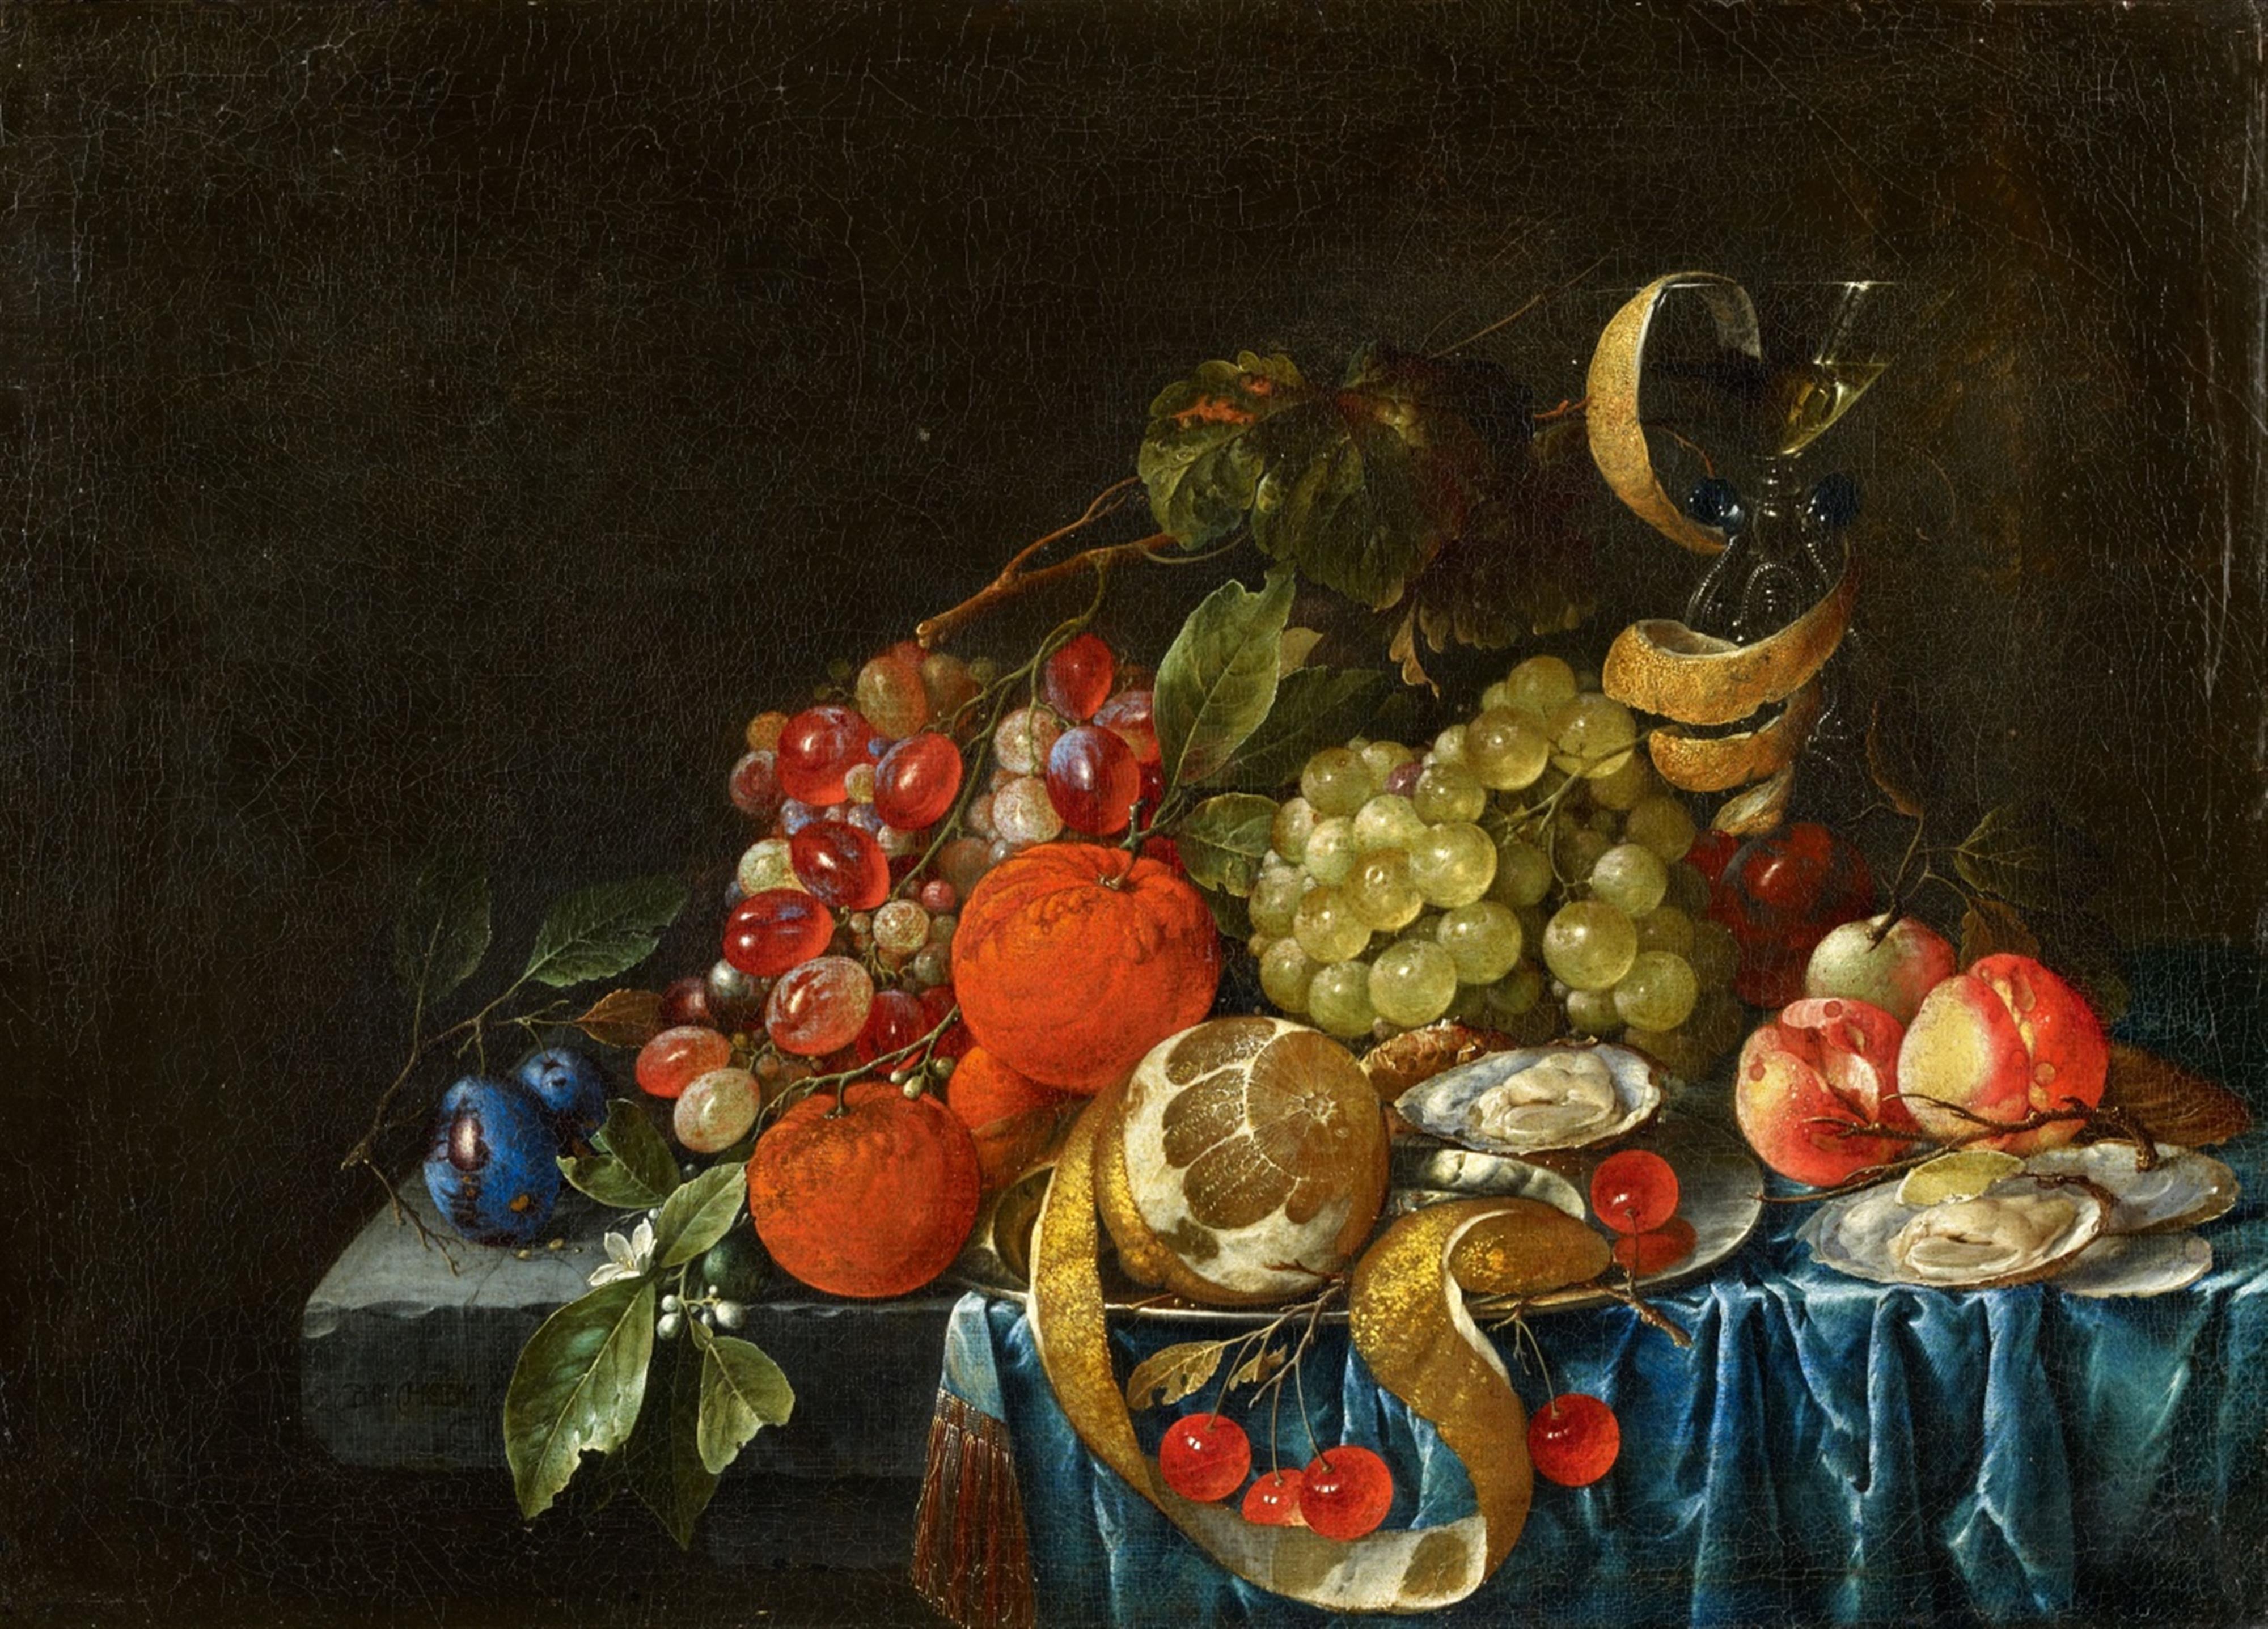 Cornelis de Heem - Fruit Still Life with Oysters and a Wine Glass - image-1